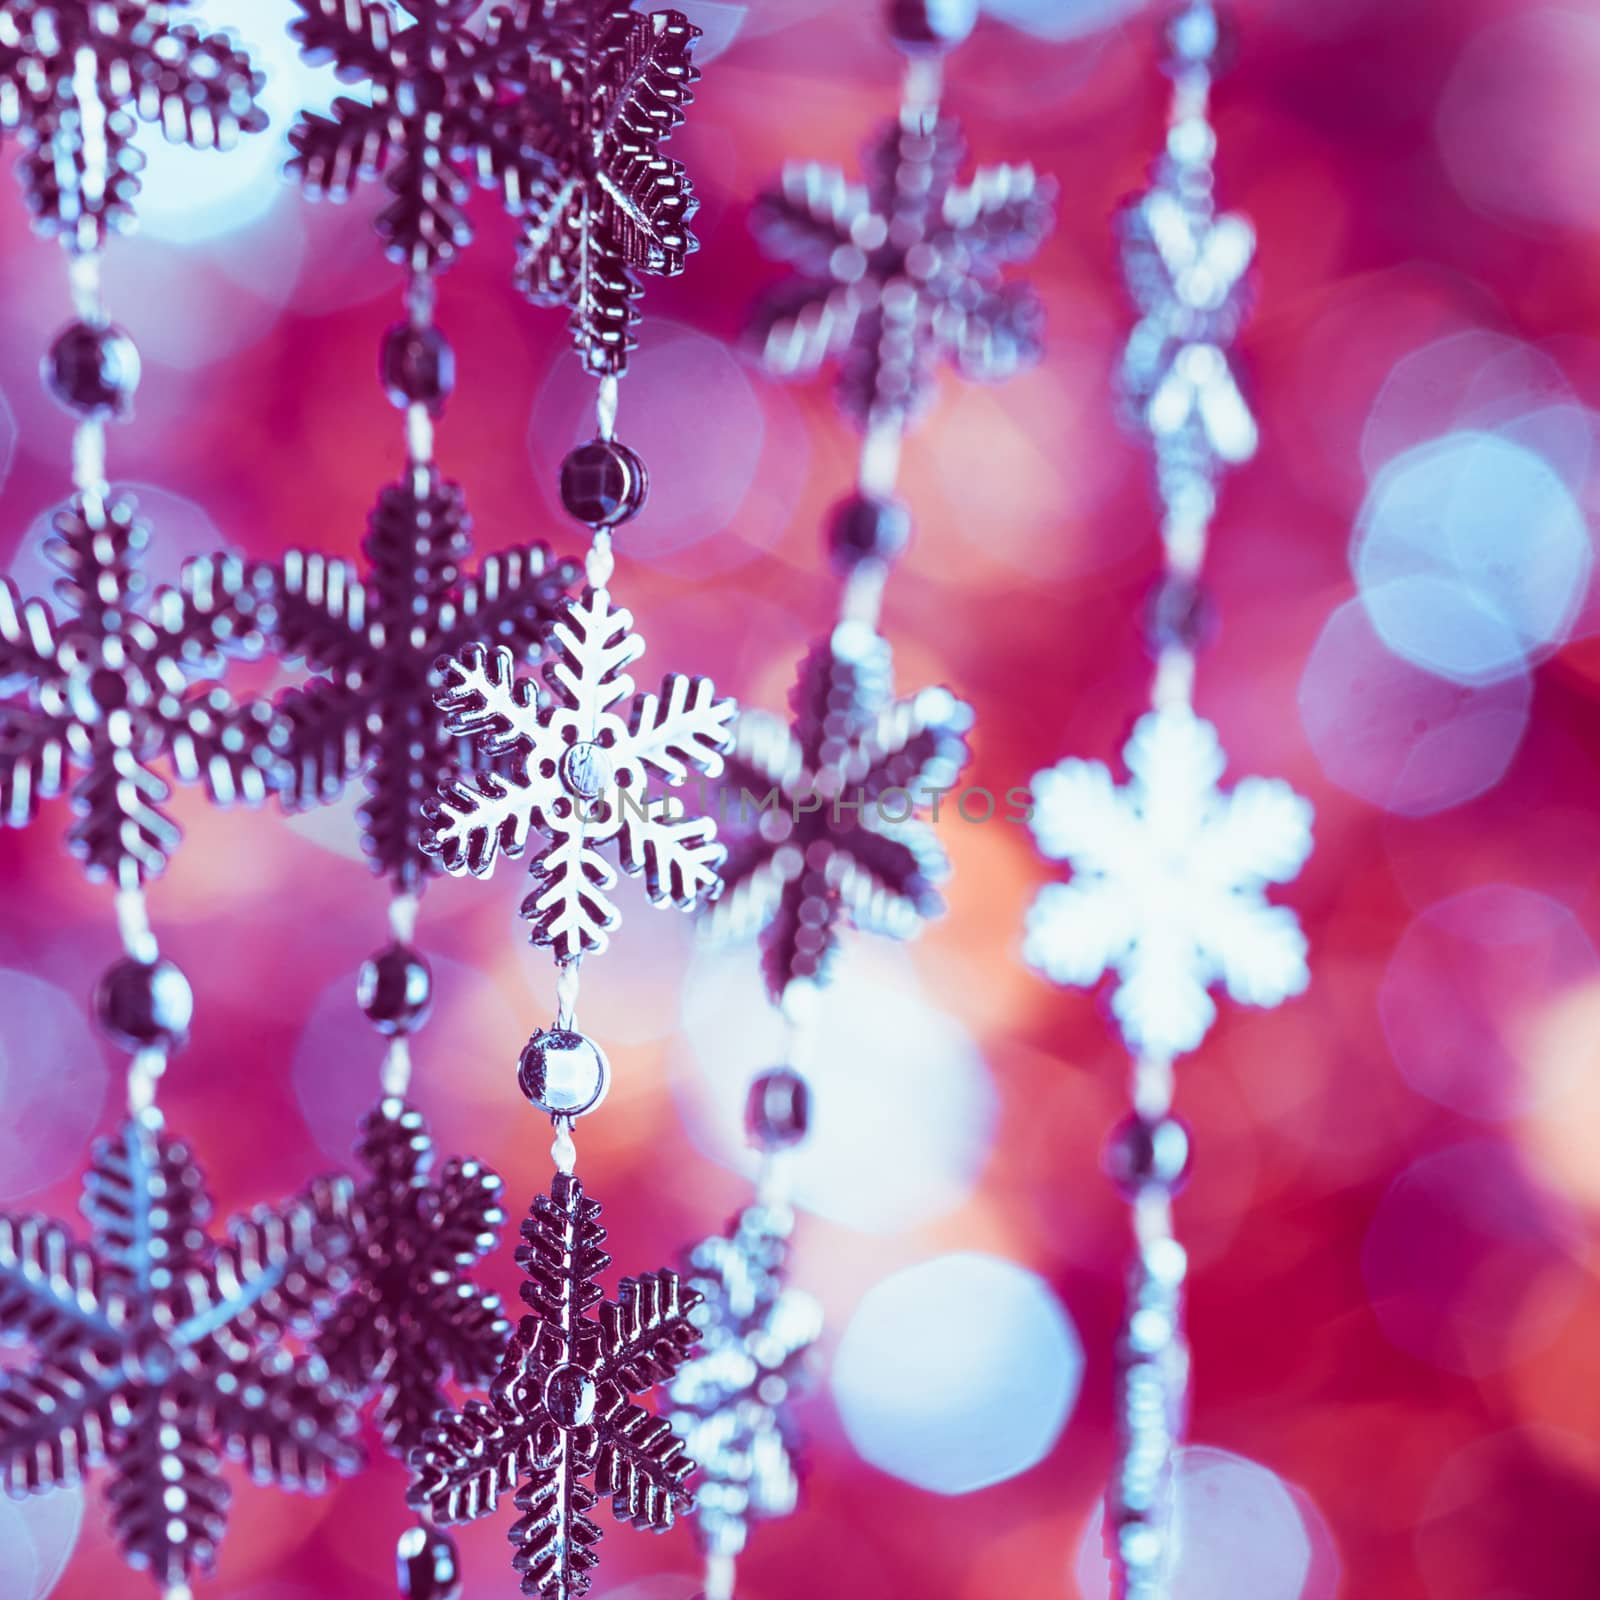 Blue snowflakes on the 
lashing over bokeh background